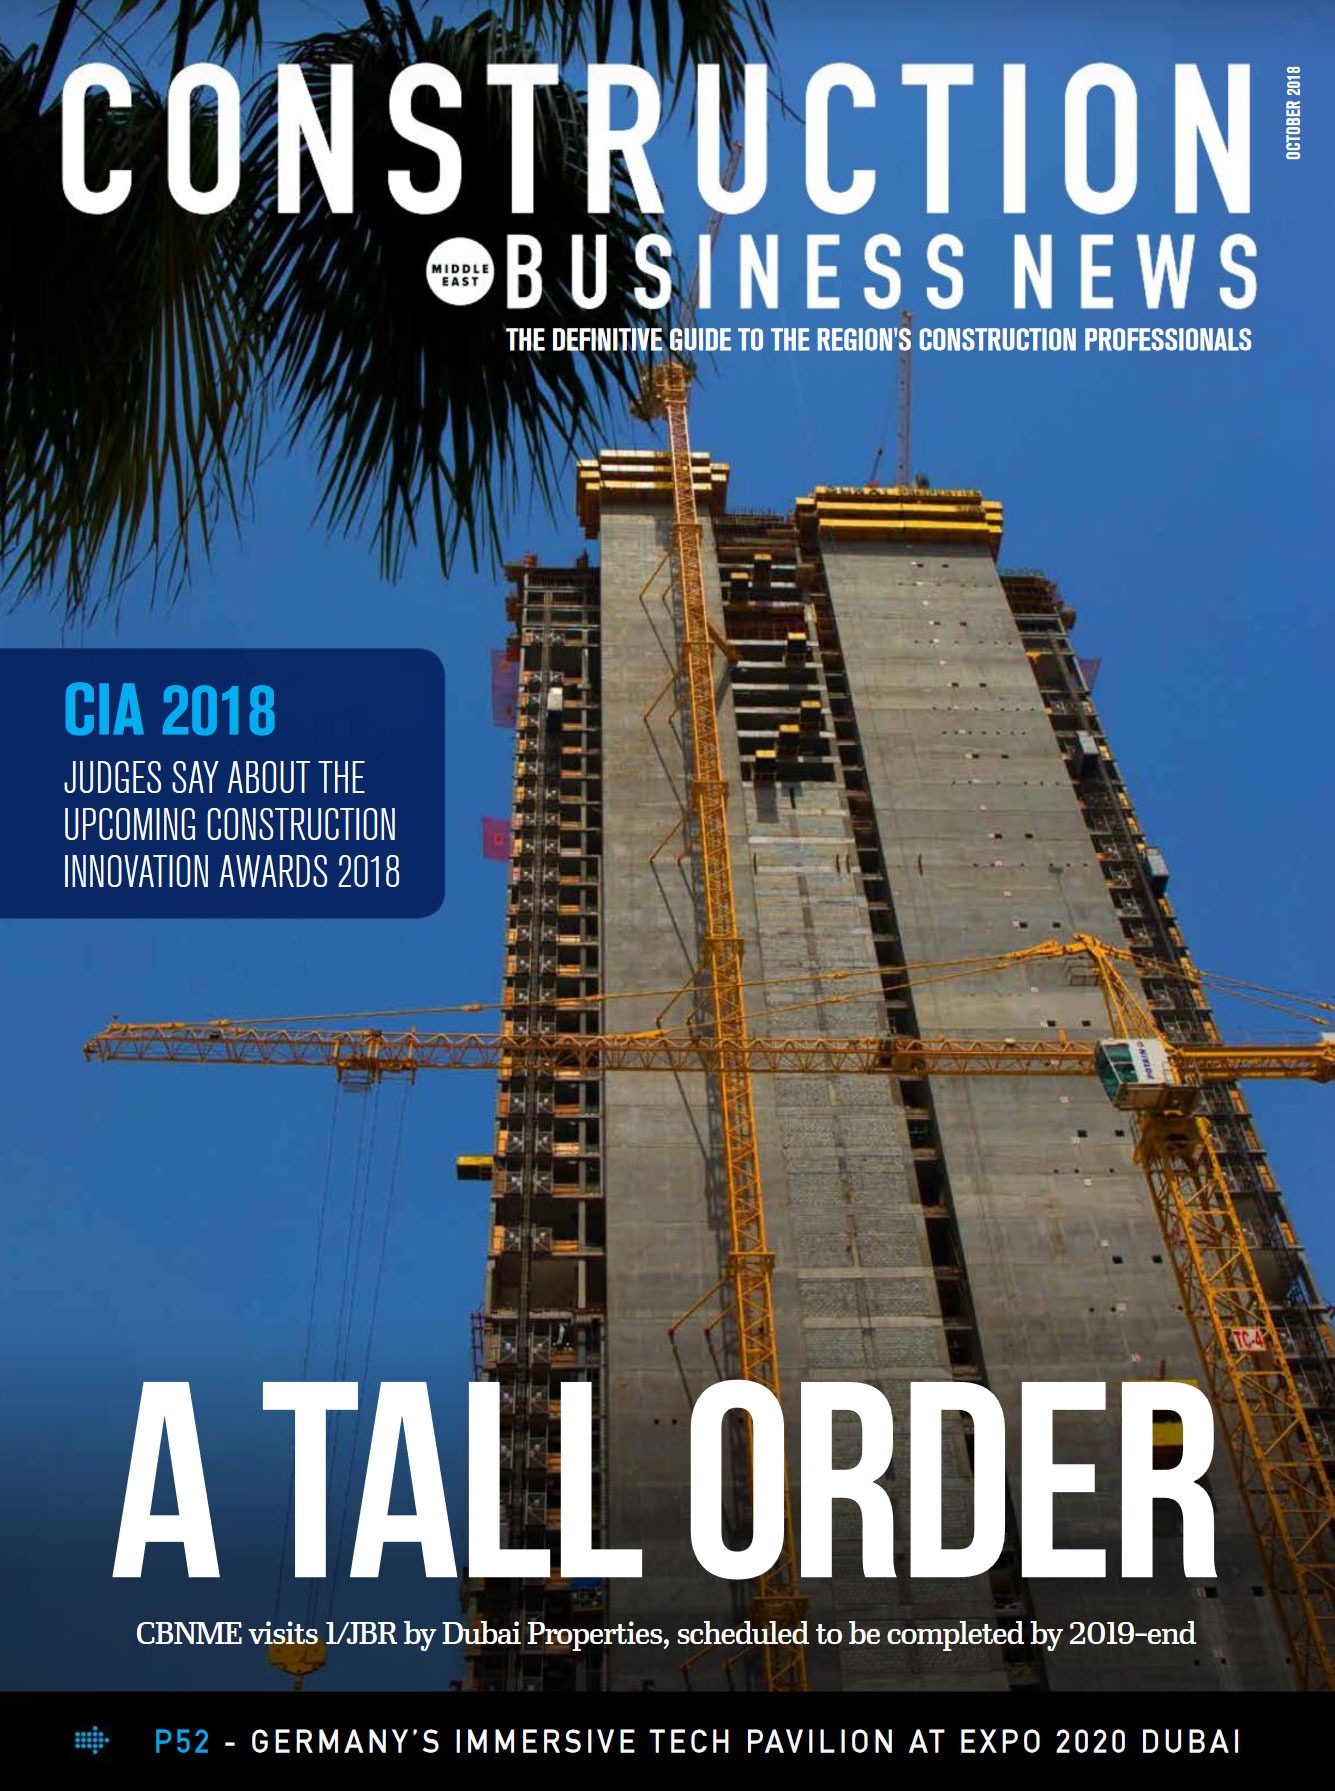 Edge in Construction Business News